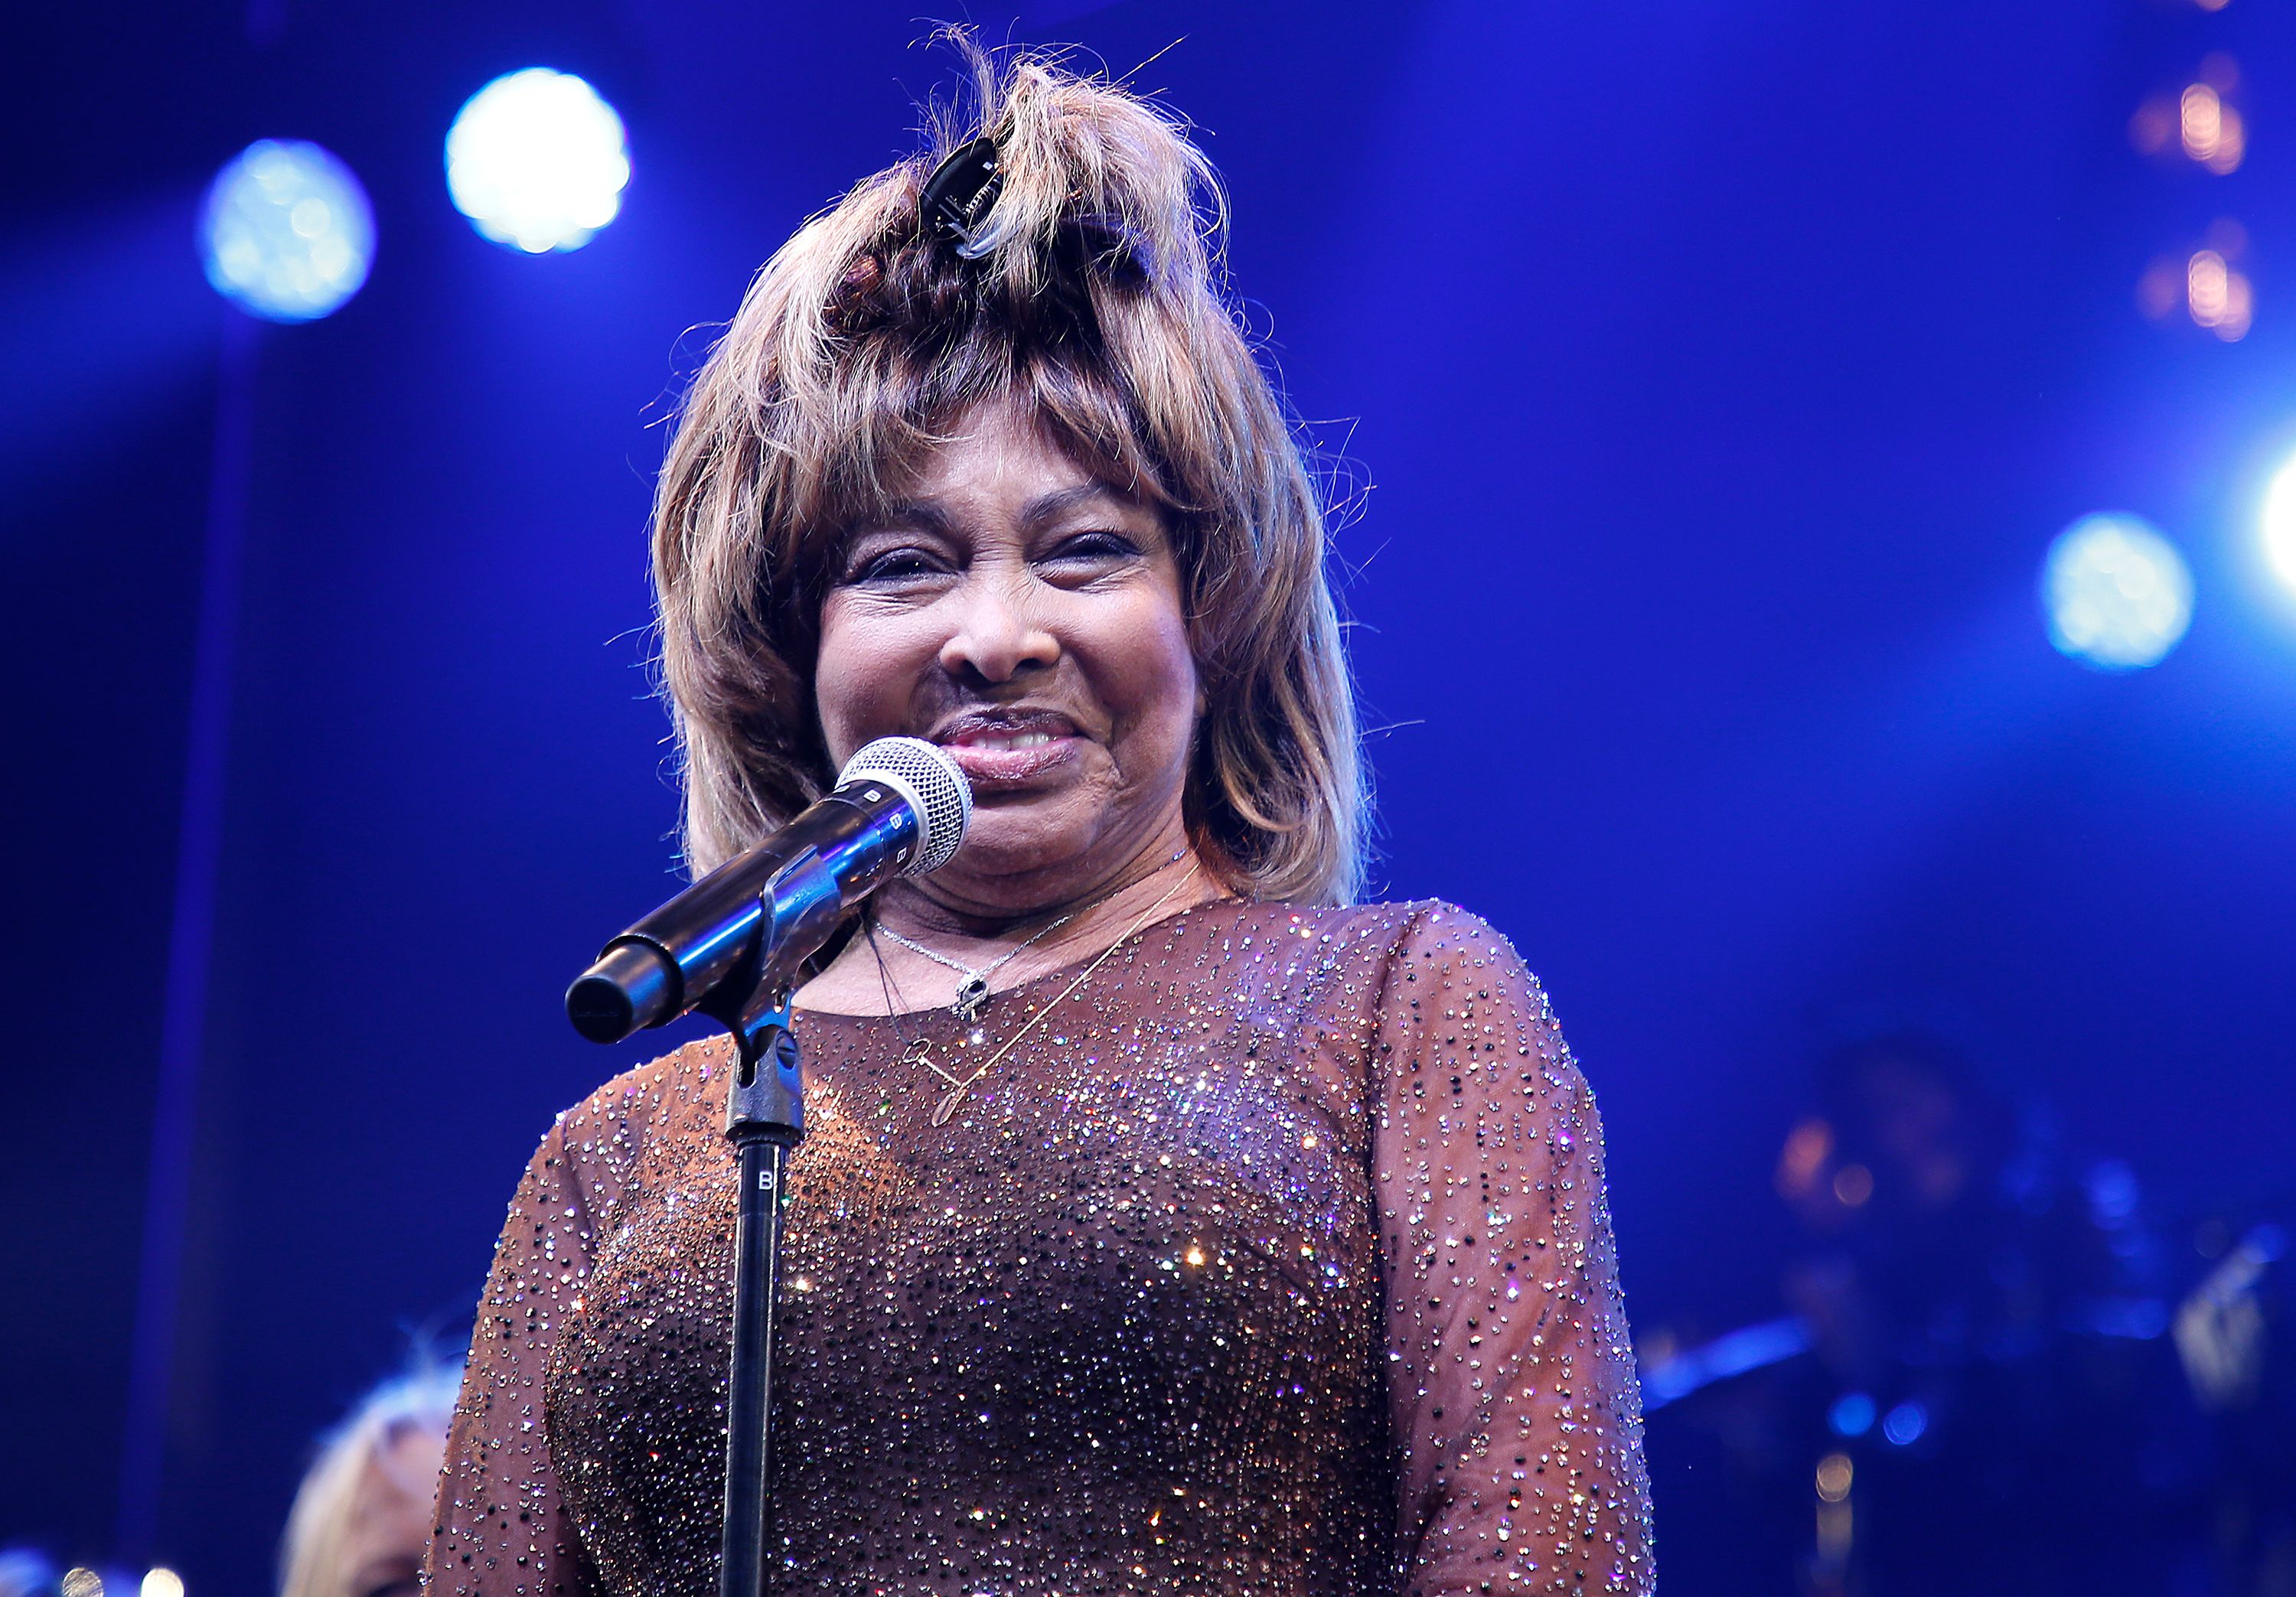 Tina Turner speaks during the 'Tina - The Tina Turner Musical' opening night at Lunt-Fontanne Theatre on November 07, 2019 in New York City.